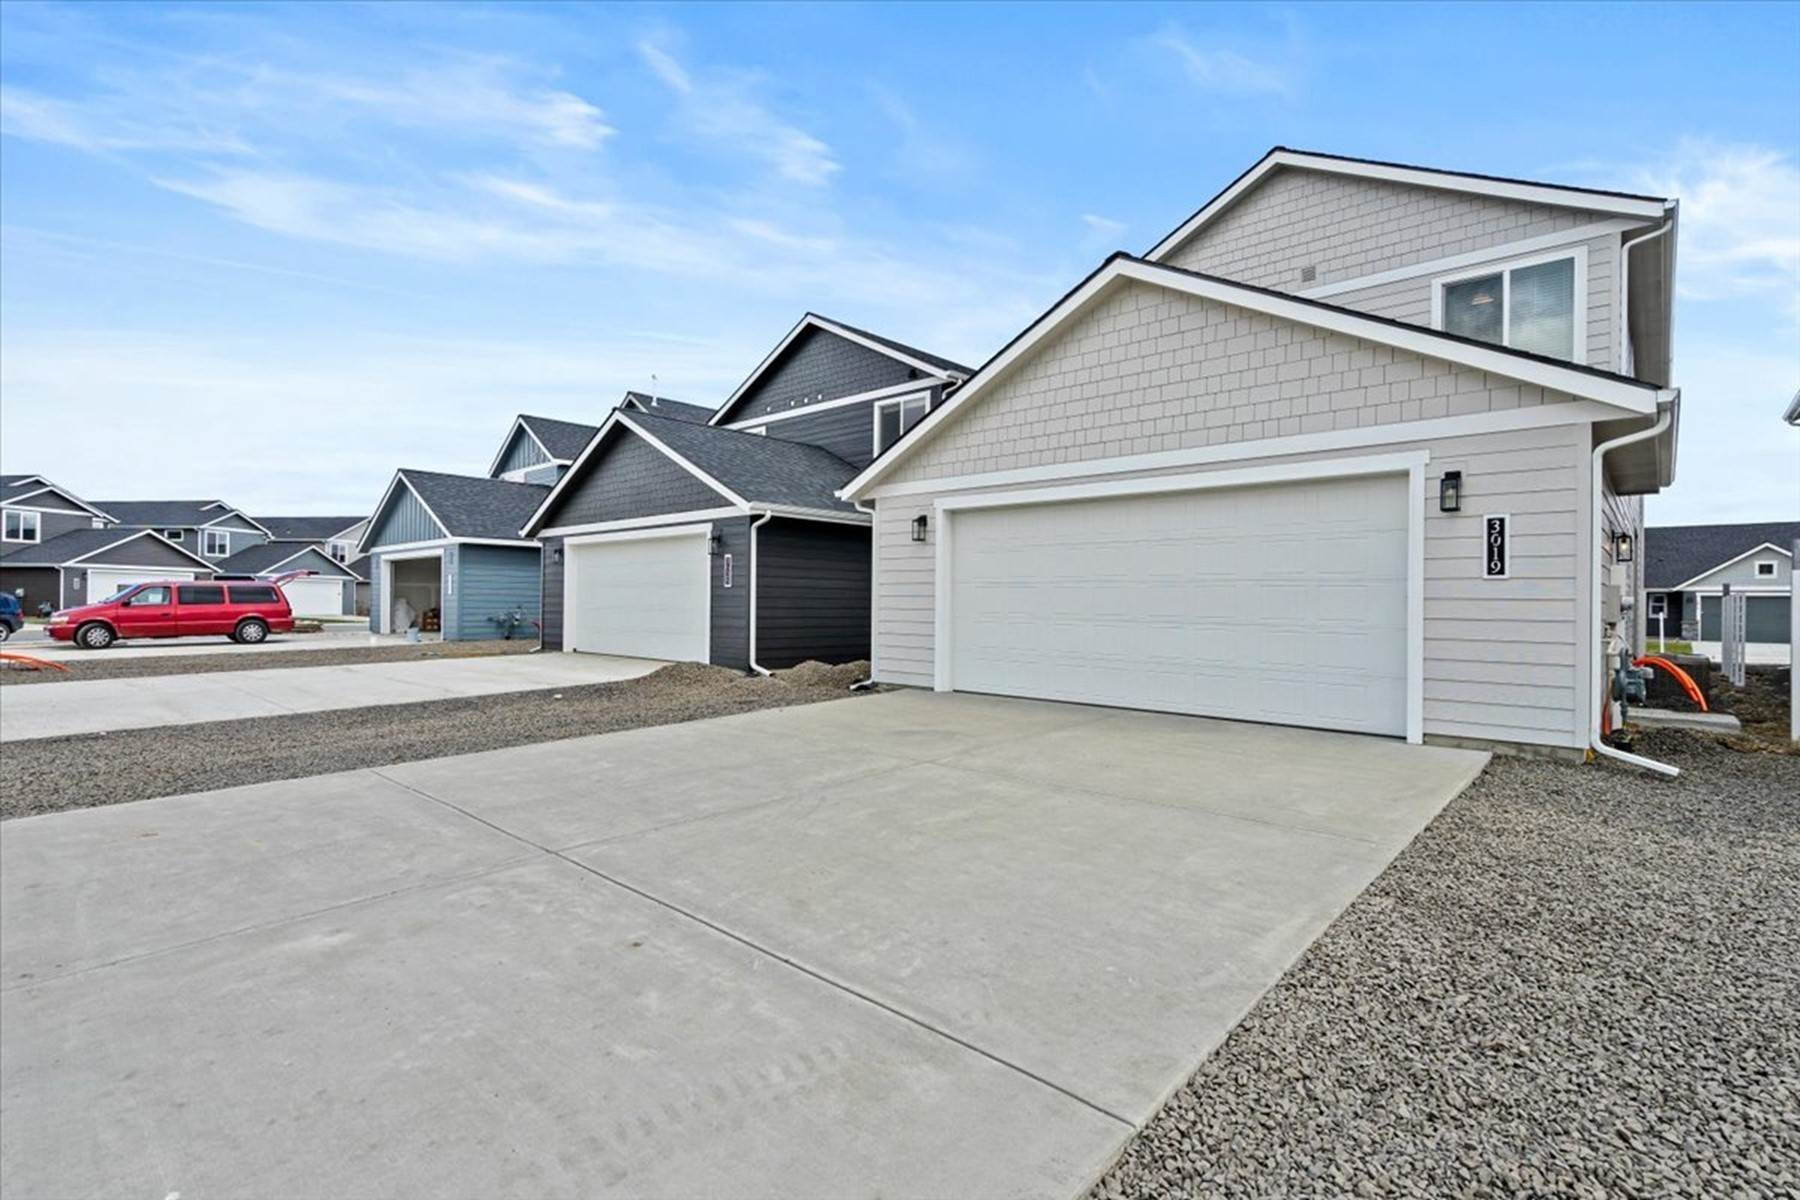 32. Single Family Homes for Sale at The Crimson 3019 N Andromeda St Post Falls, Idaho 83854 United States